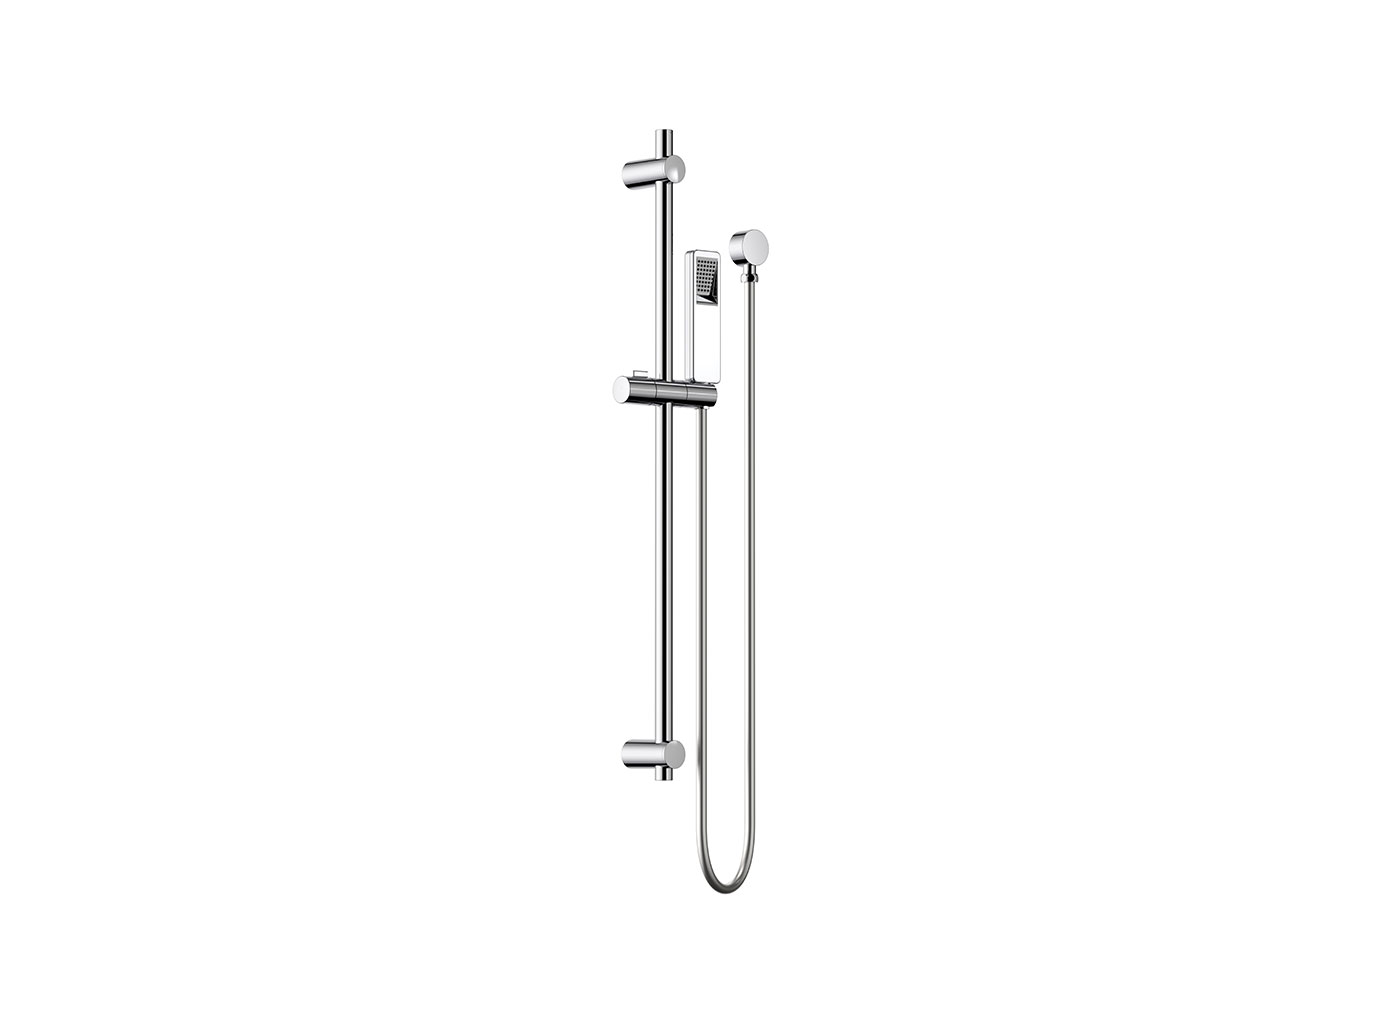 Clark's rail showers are designed for the whole family and include a rail slider